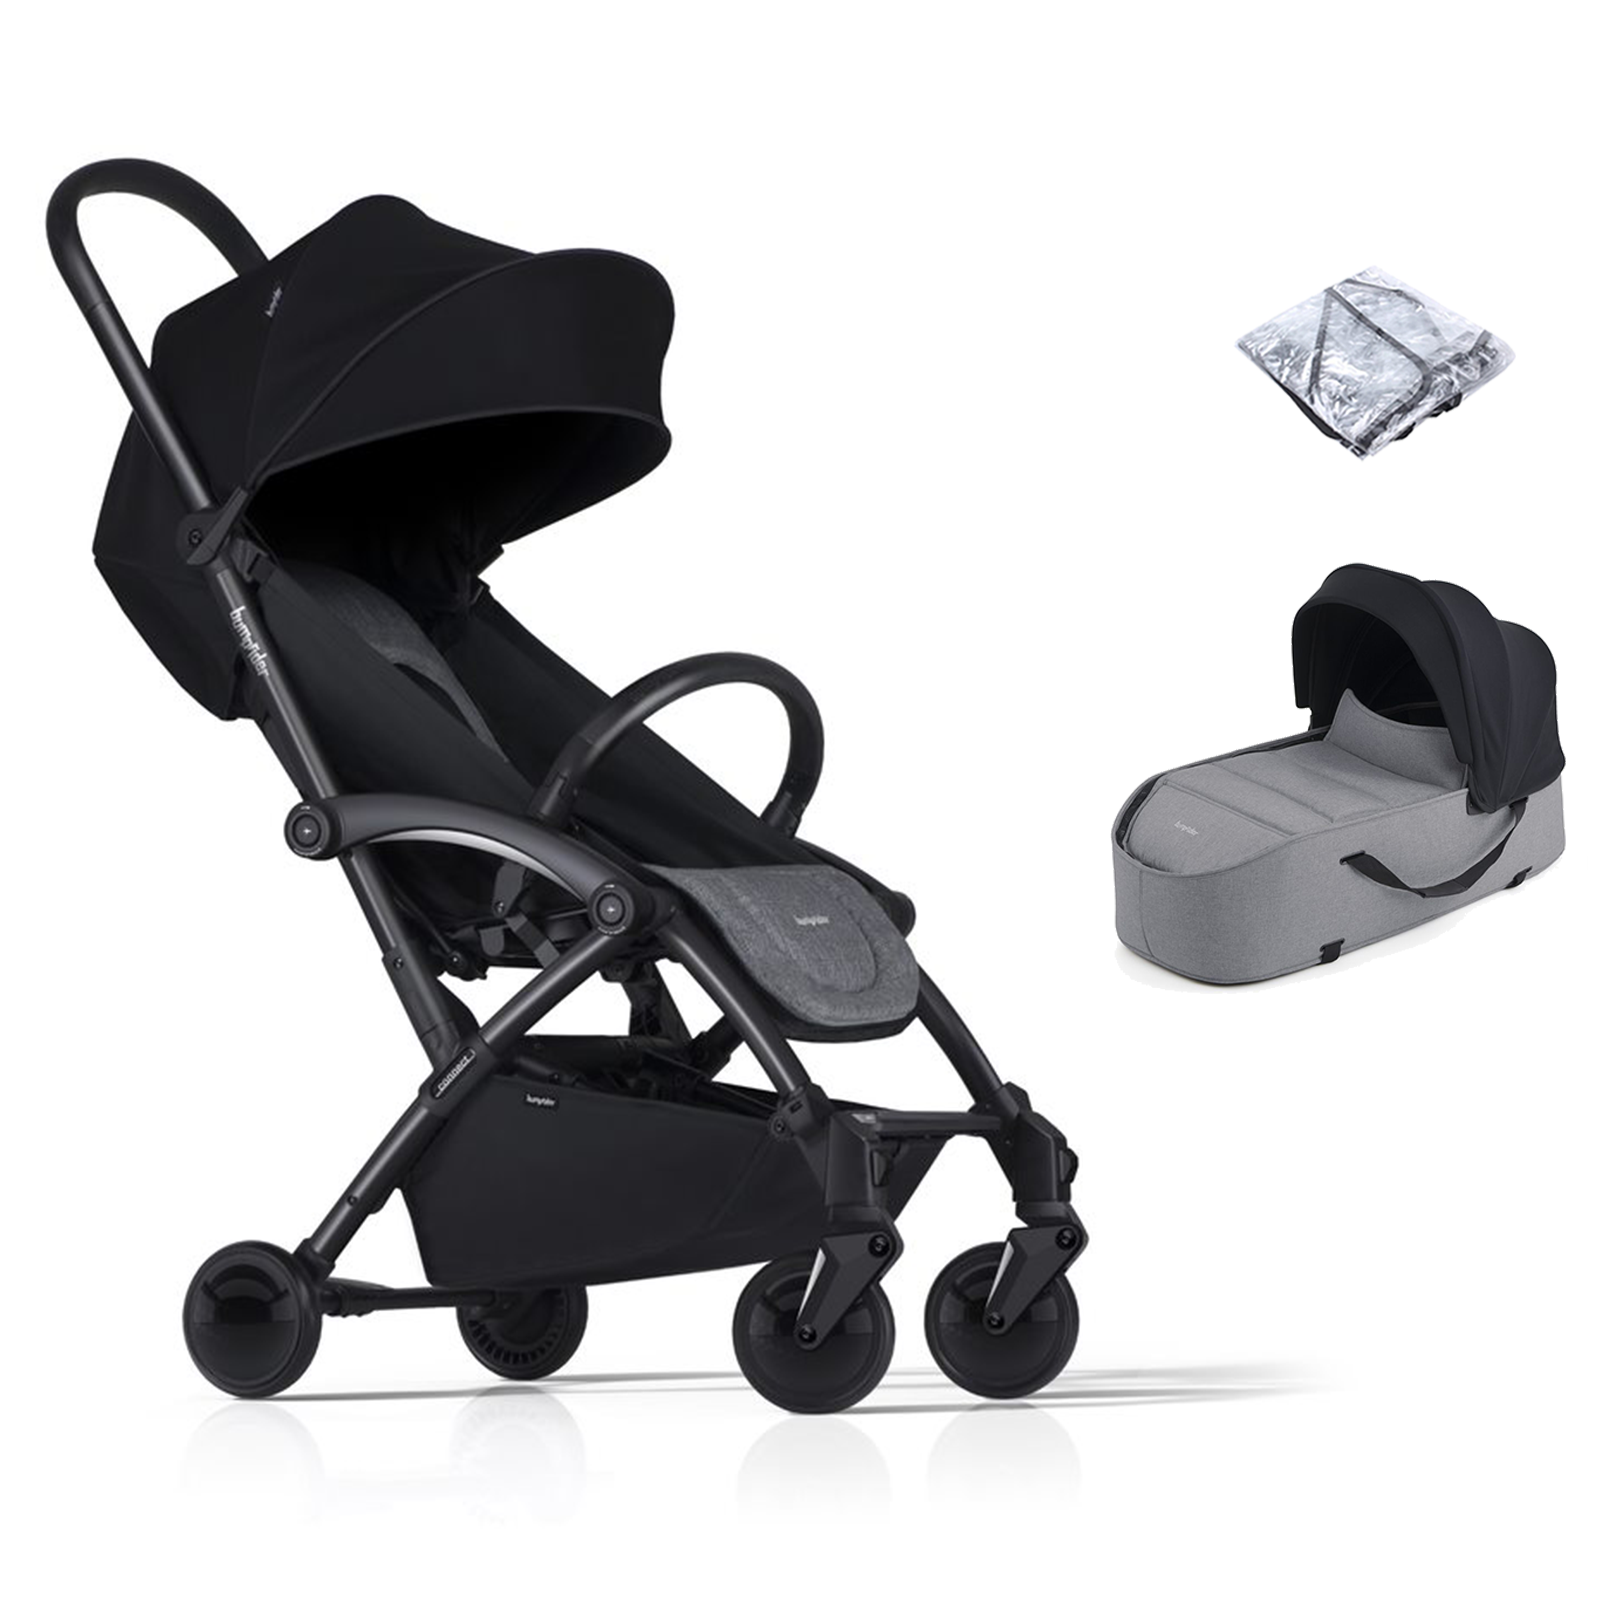 Bumprider Connect2 Stroller with Carrycot - Black & Grey